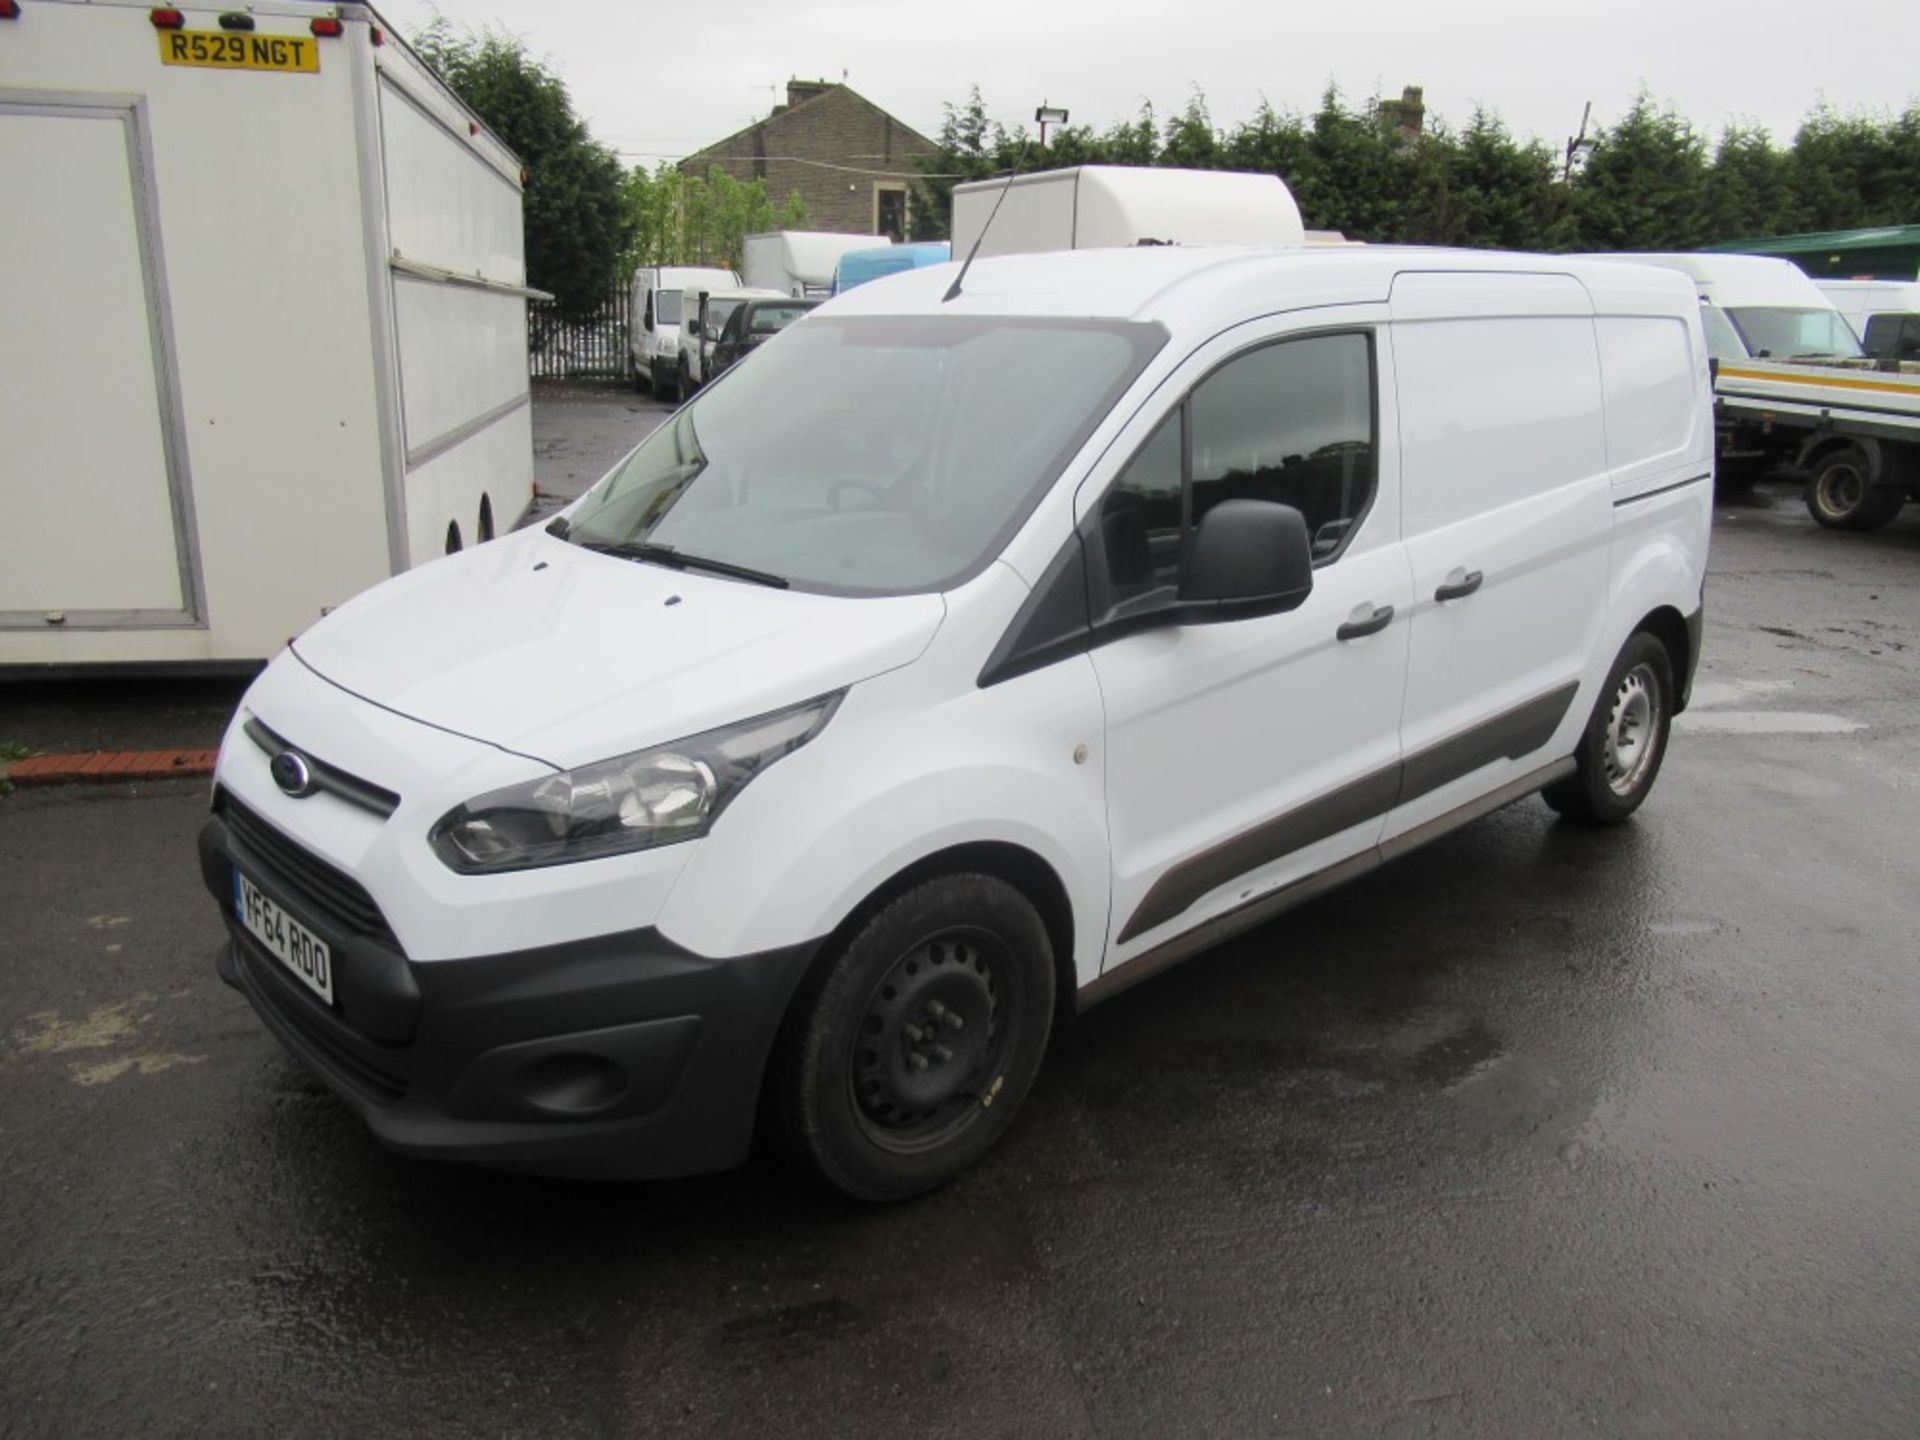 64 reg FORD TRANSIT CONNECT 210 ECO-TECH, 1ST REG 01/15, 108763M WARRANTED, V5 HERE, 1 OWNER FROM - Image 2 of 6